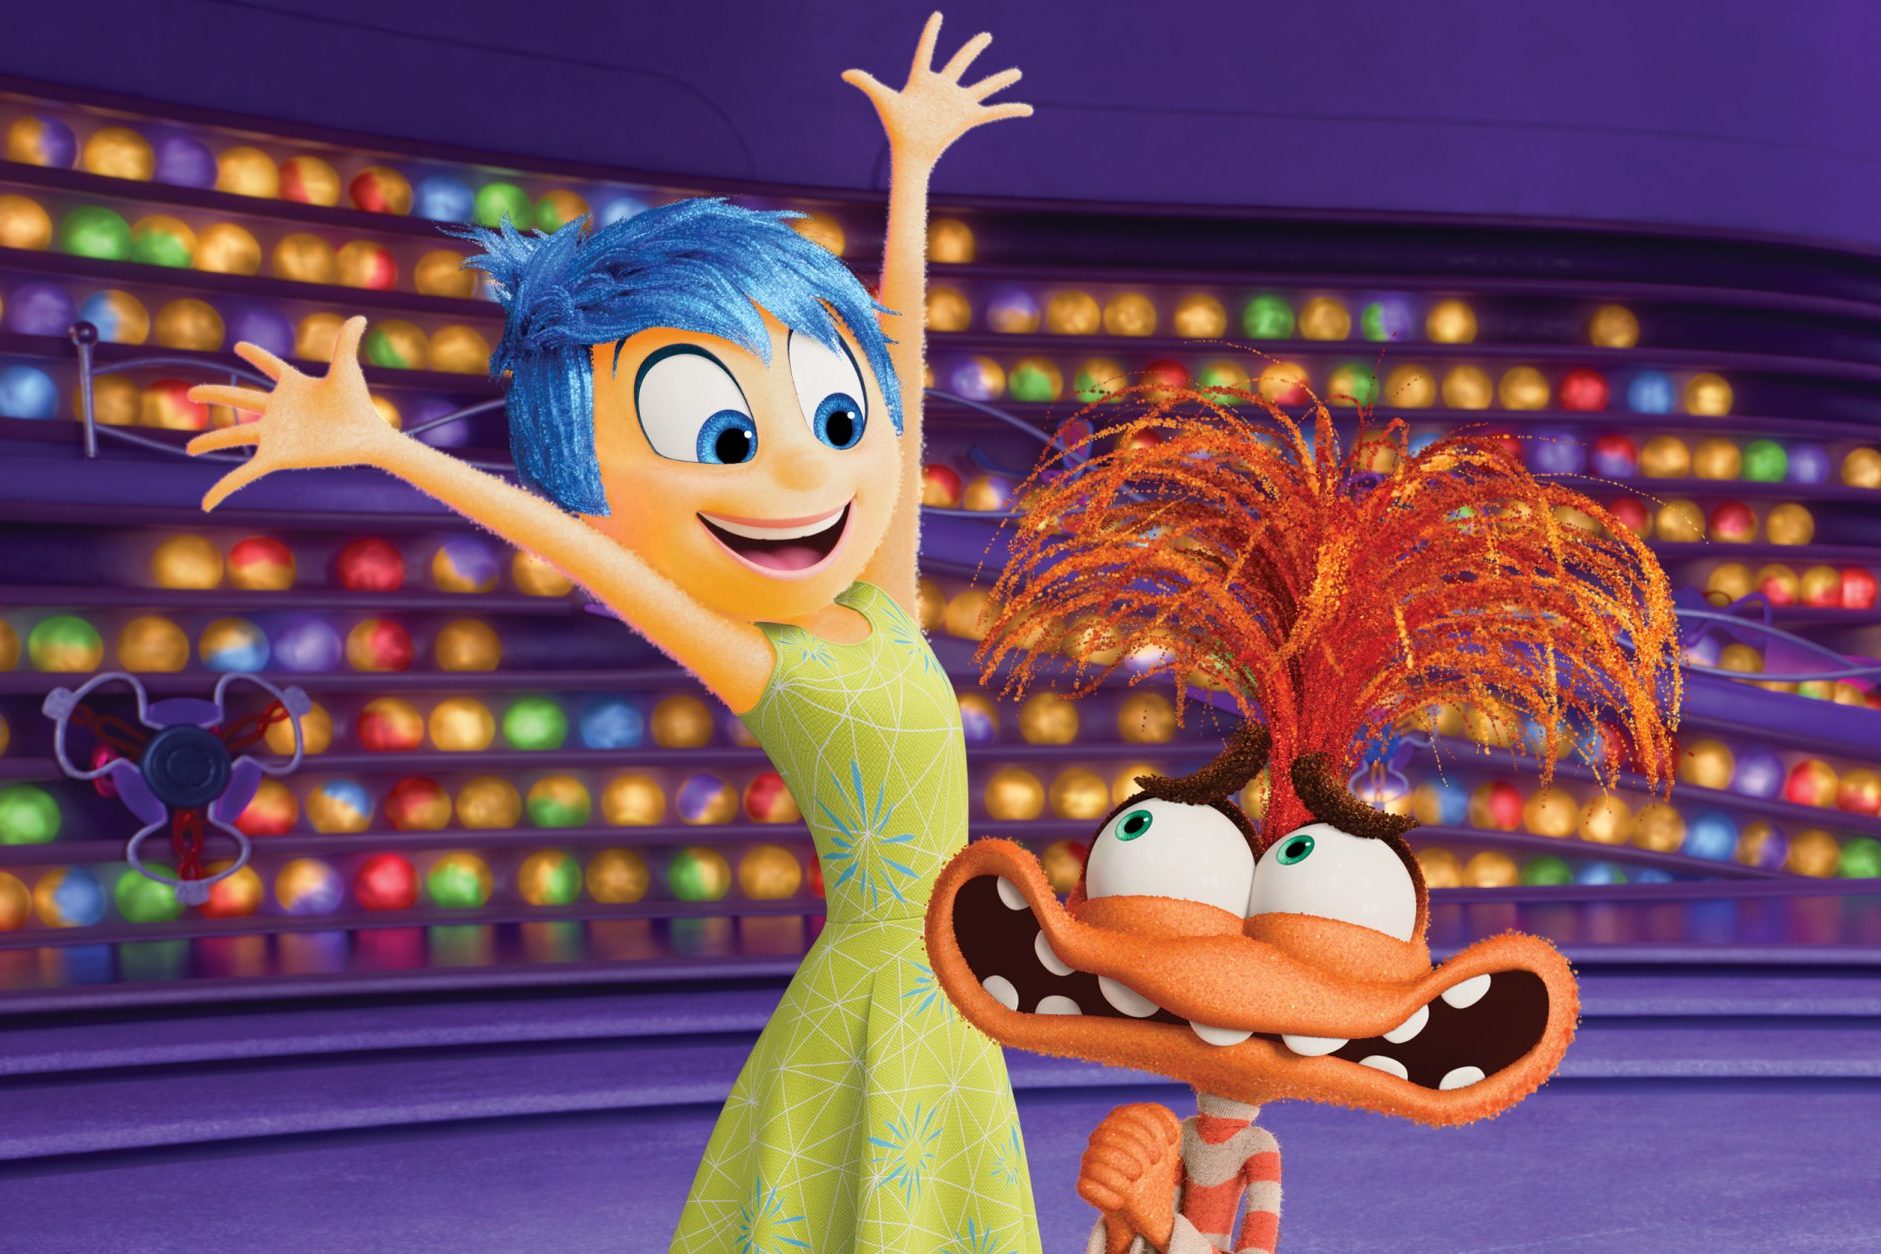 Disney/Pixar's Inside Out 2: New Emotions and Friends in Riley's Mind